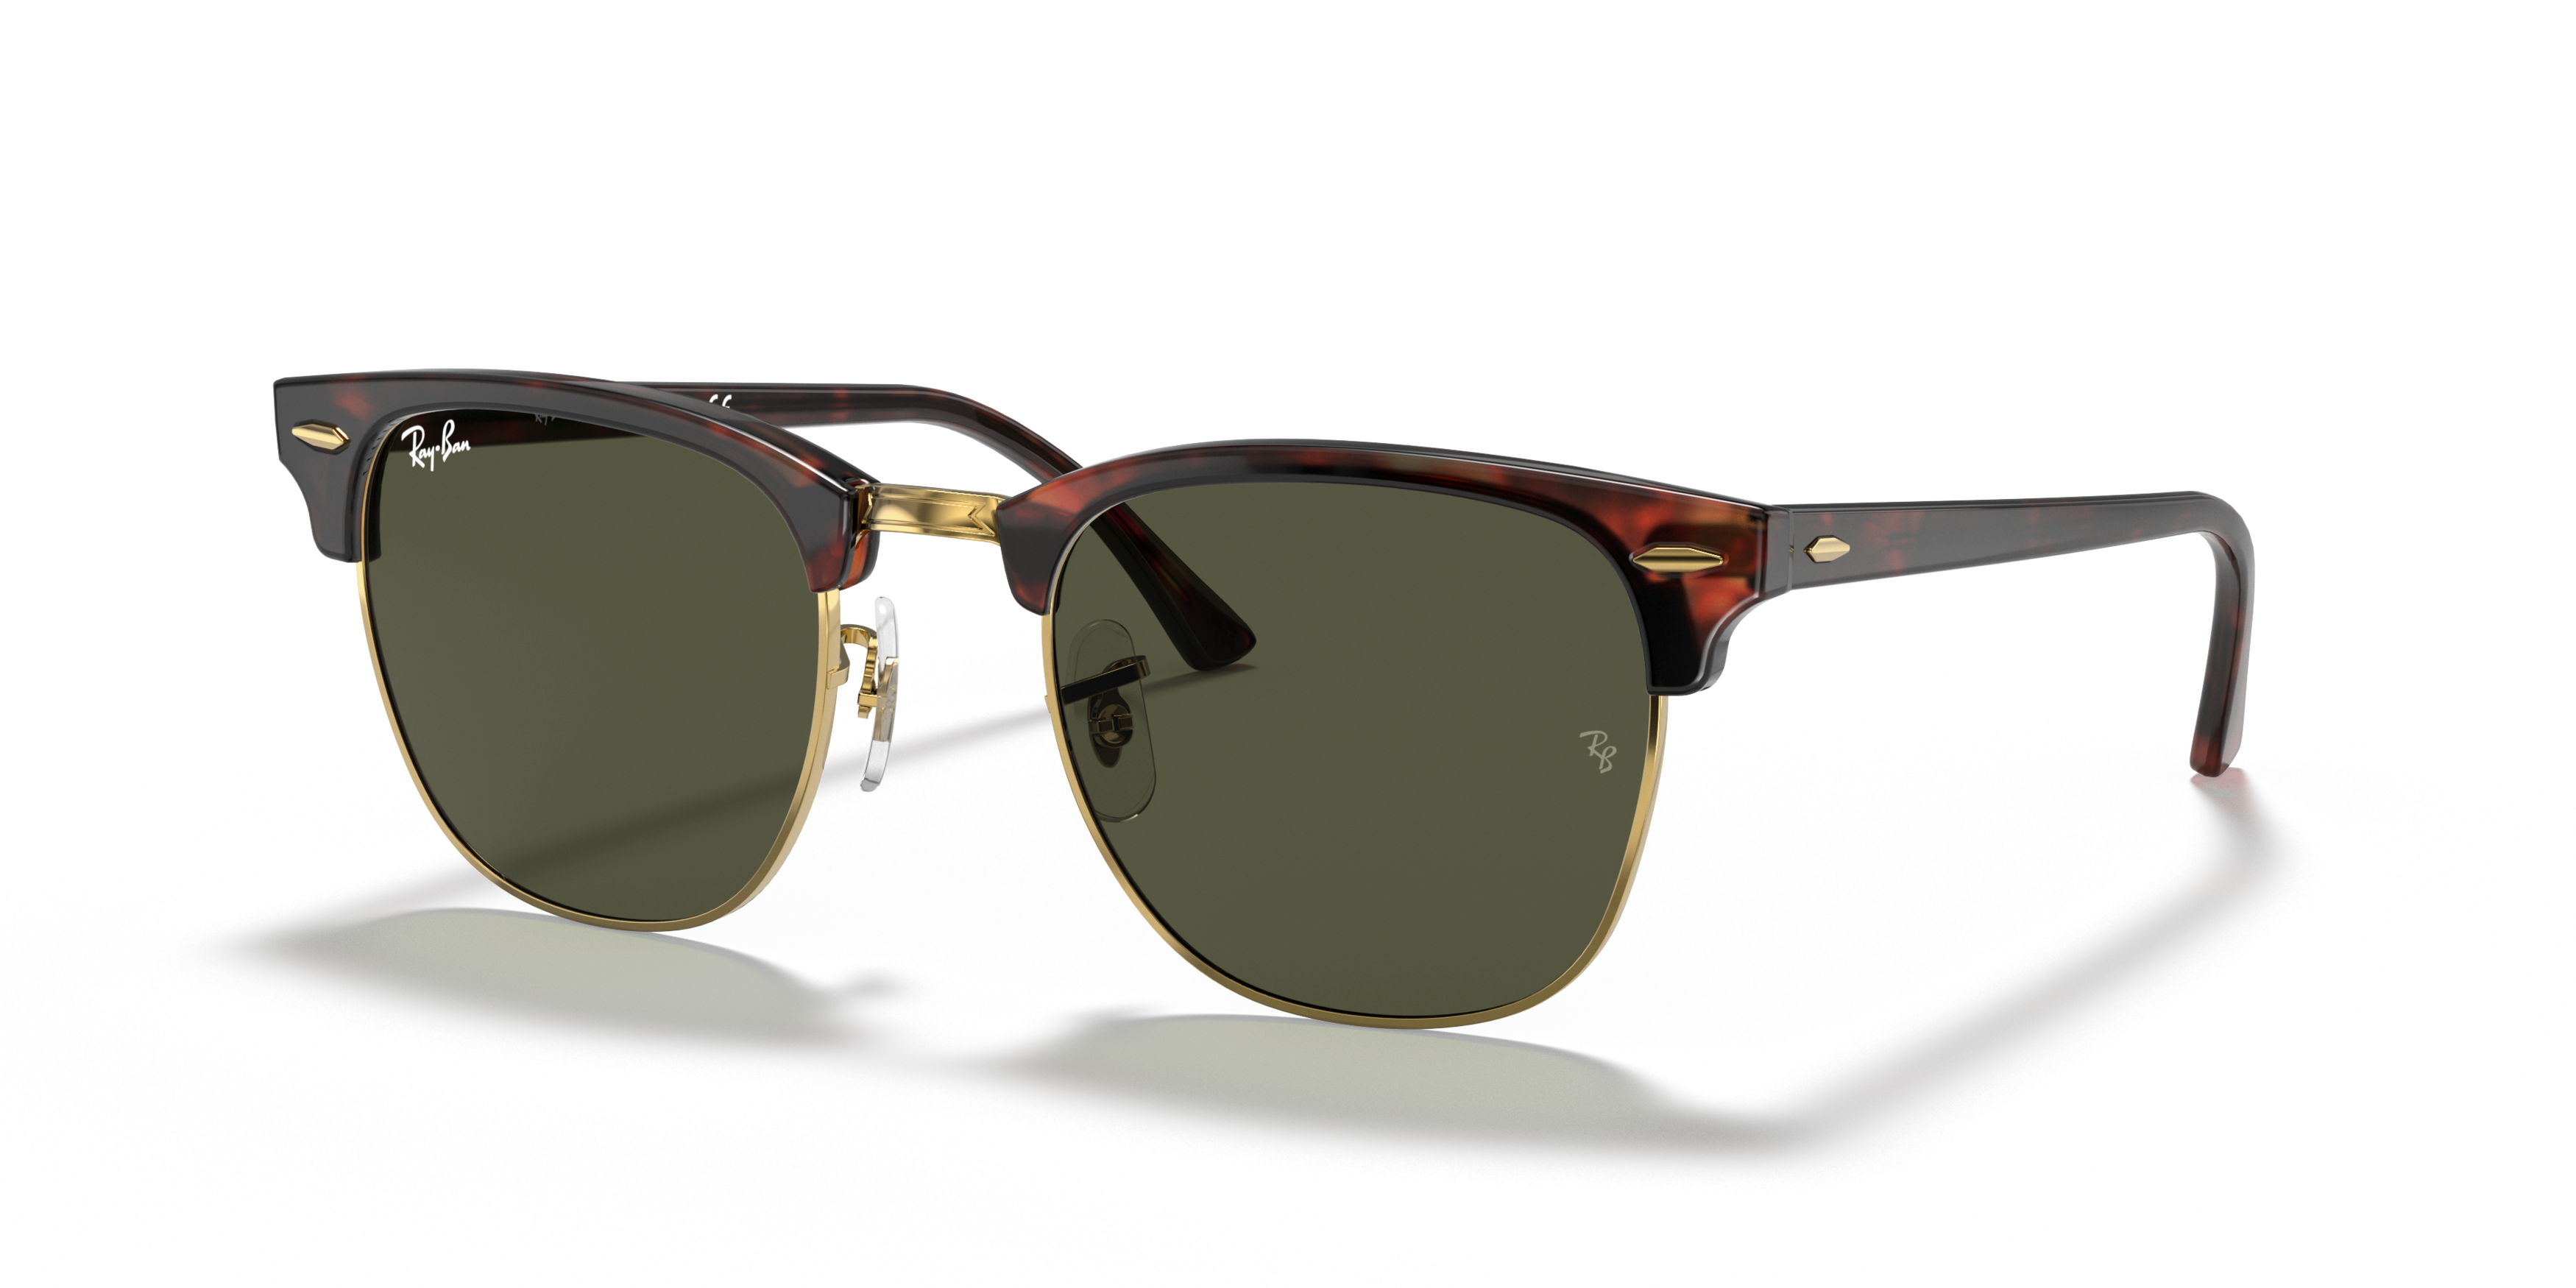 Angle_Left01 Ray-Ban Clubmaster RB 3016 (W0365) Sunglasses Green / Black